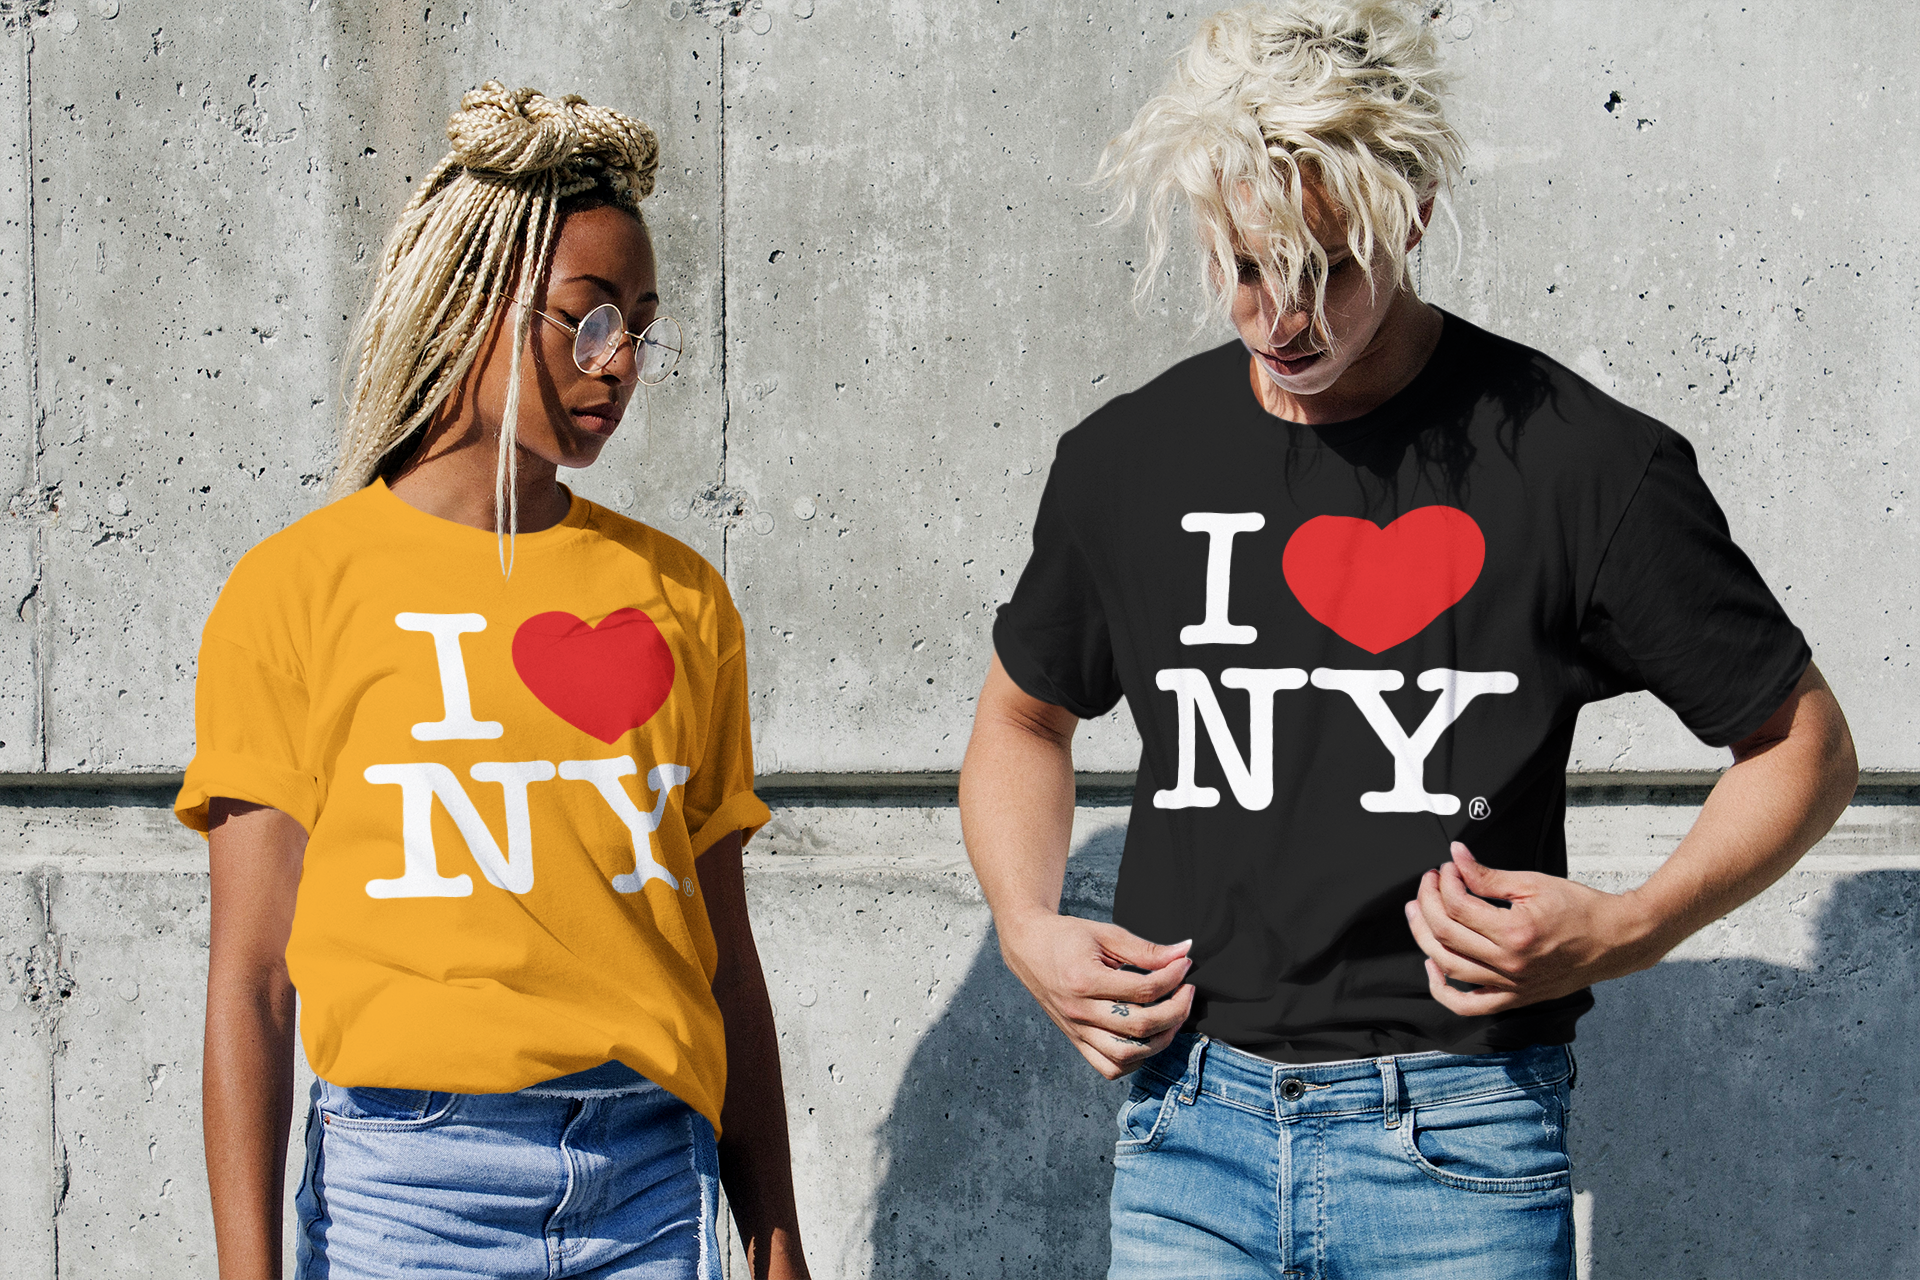 andrageren at retfærdiggøre fornuft Buy Officially Licensed I Love NY T-Shirts, Sweatshirts, Hoodies, Tees